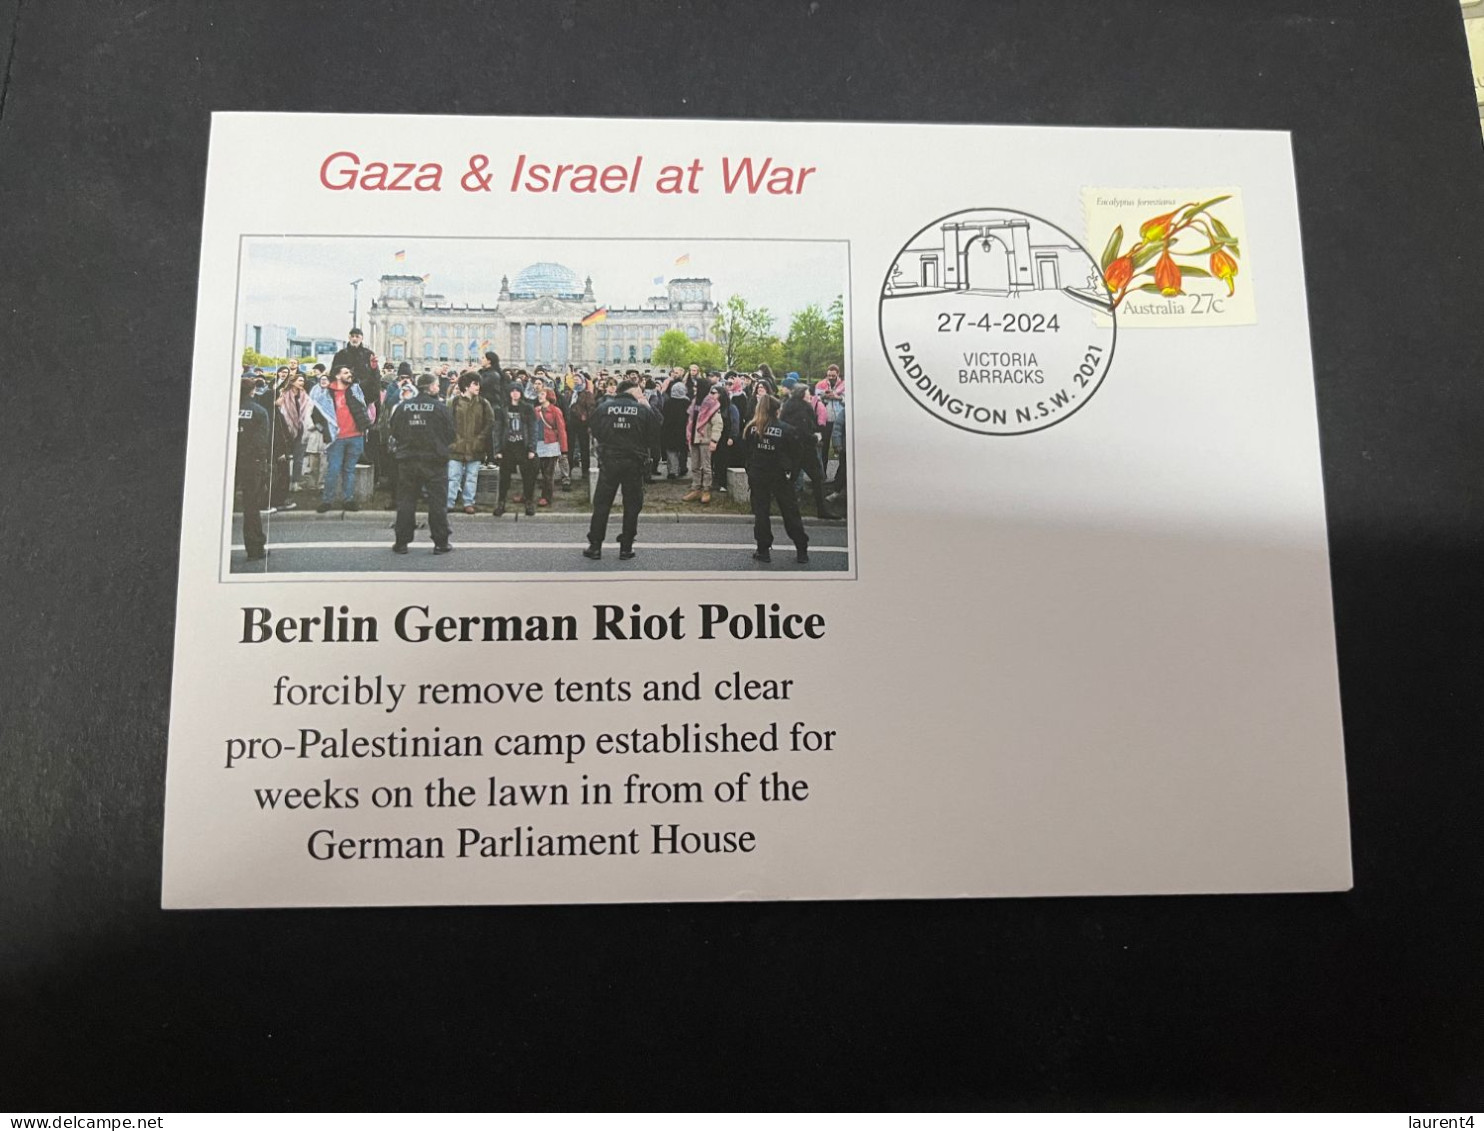 28-4-2024 (3 Z 17) GAZA - Berlin German Riot Police Forcibly Remove Tents And Clear Por-Plestian Camp On Lawn - Militares